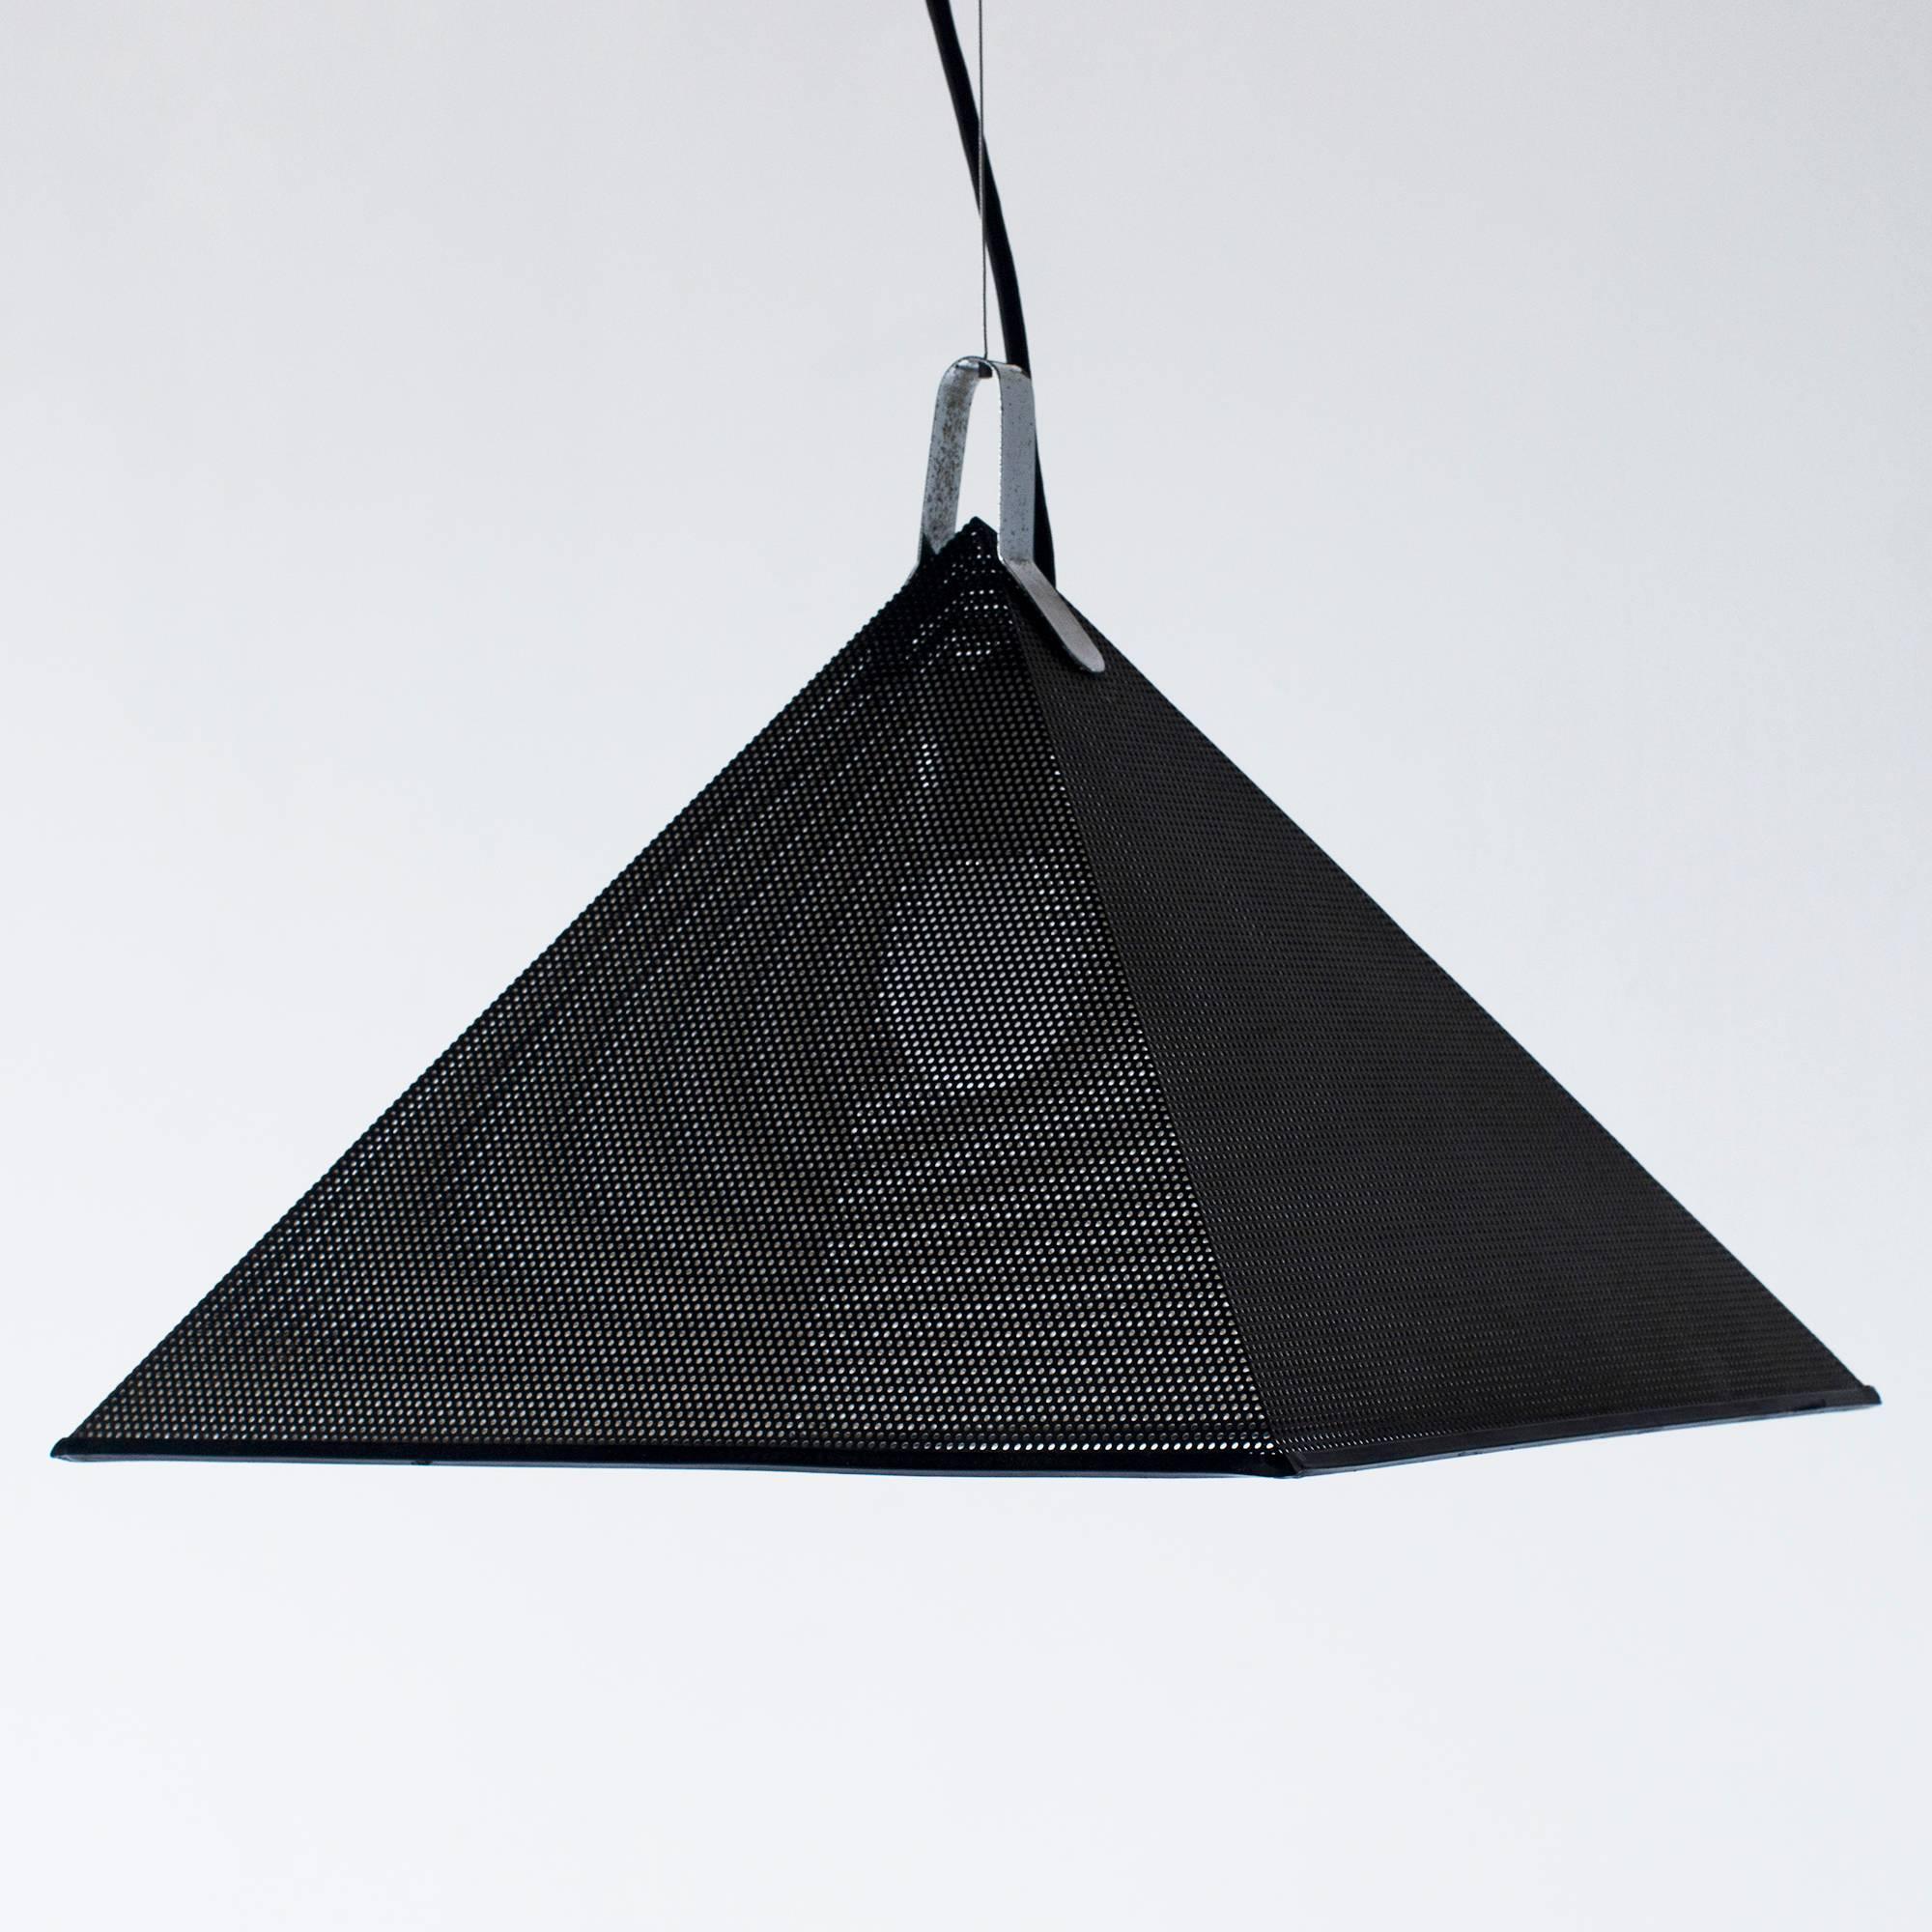 Trimesh pendant lamp designed by Shohei Mihara for Yamagiwa.
Shade outside is black, inside is white. Punching metal shade can be able to pass the light beam.